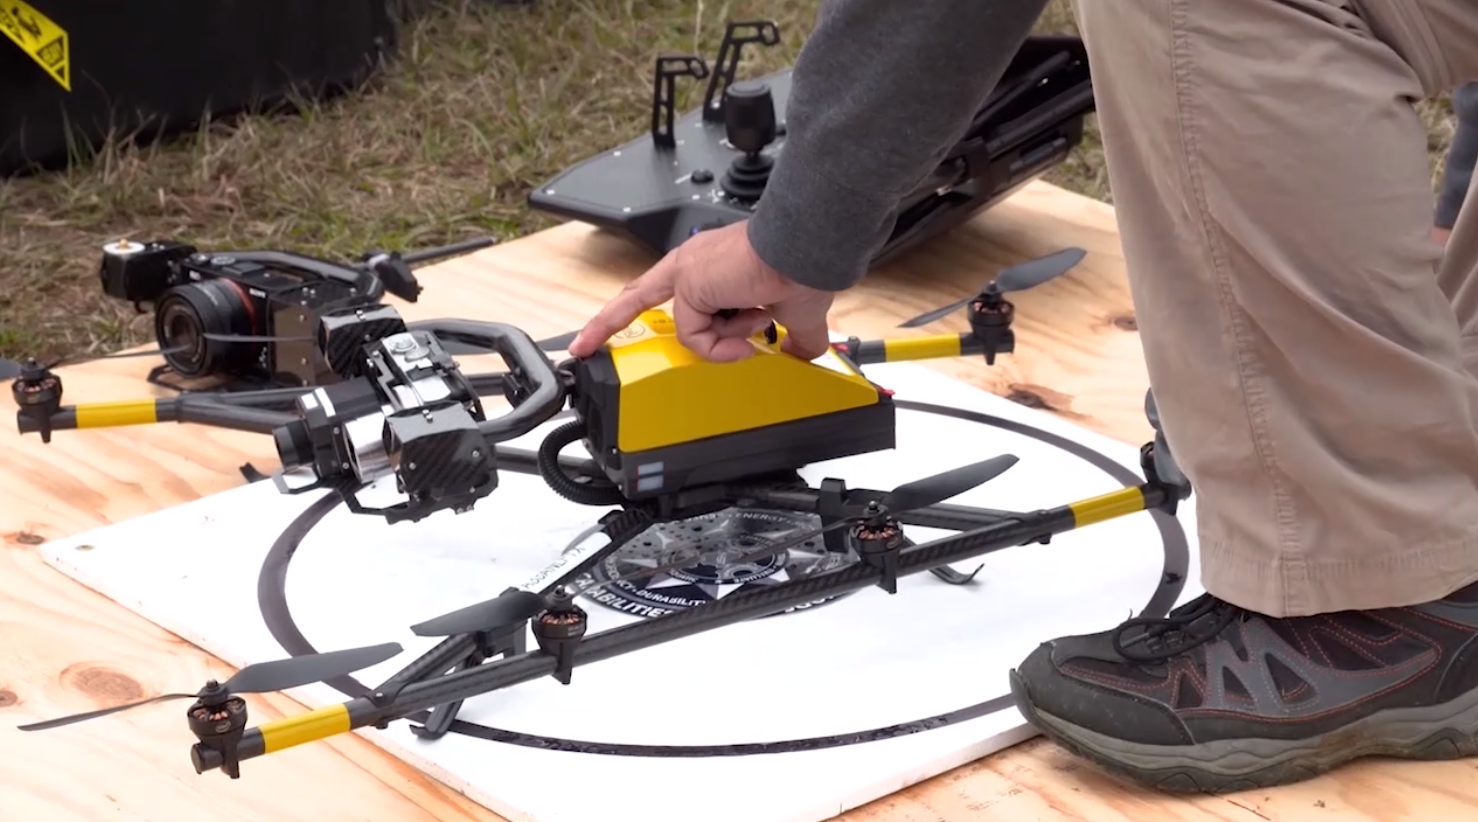 Drone is inspected by hand during First Responder Robotic Operations System Test